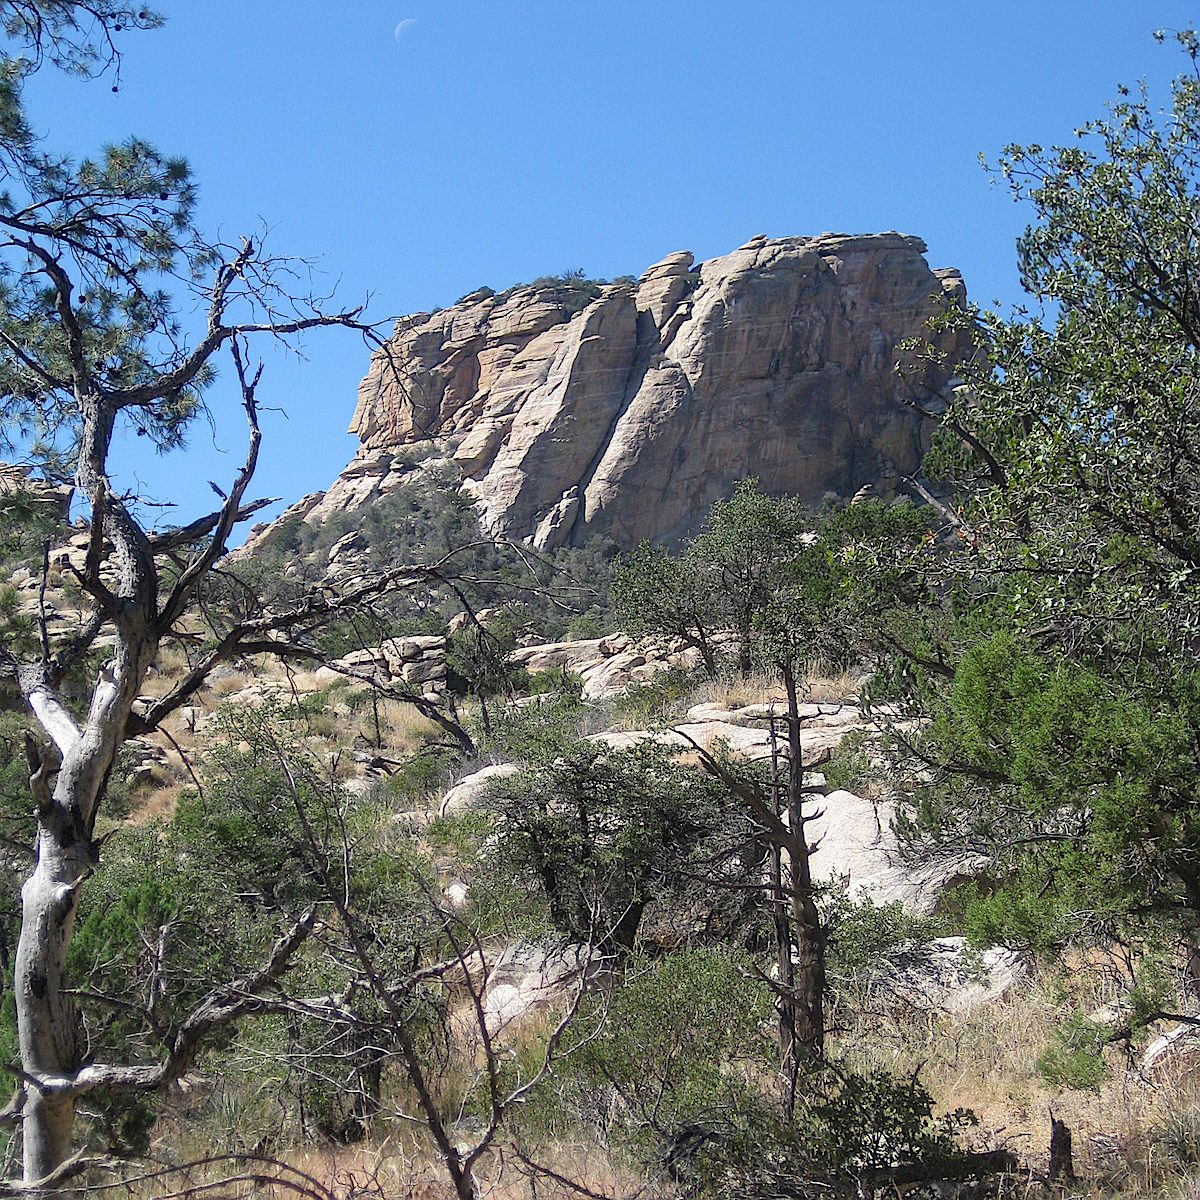 The cliffs surrounding Airmen Peak with the moon barely visible - looking up from Molino Canyon. October 2011